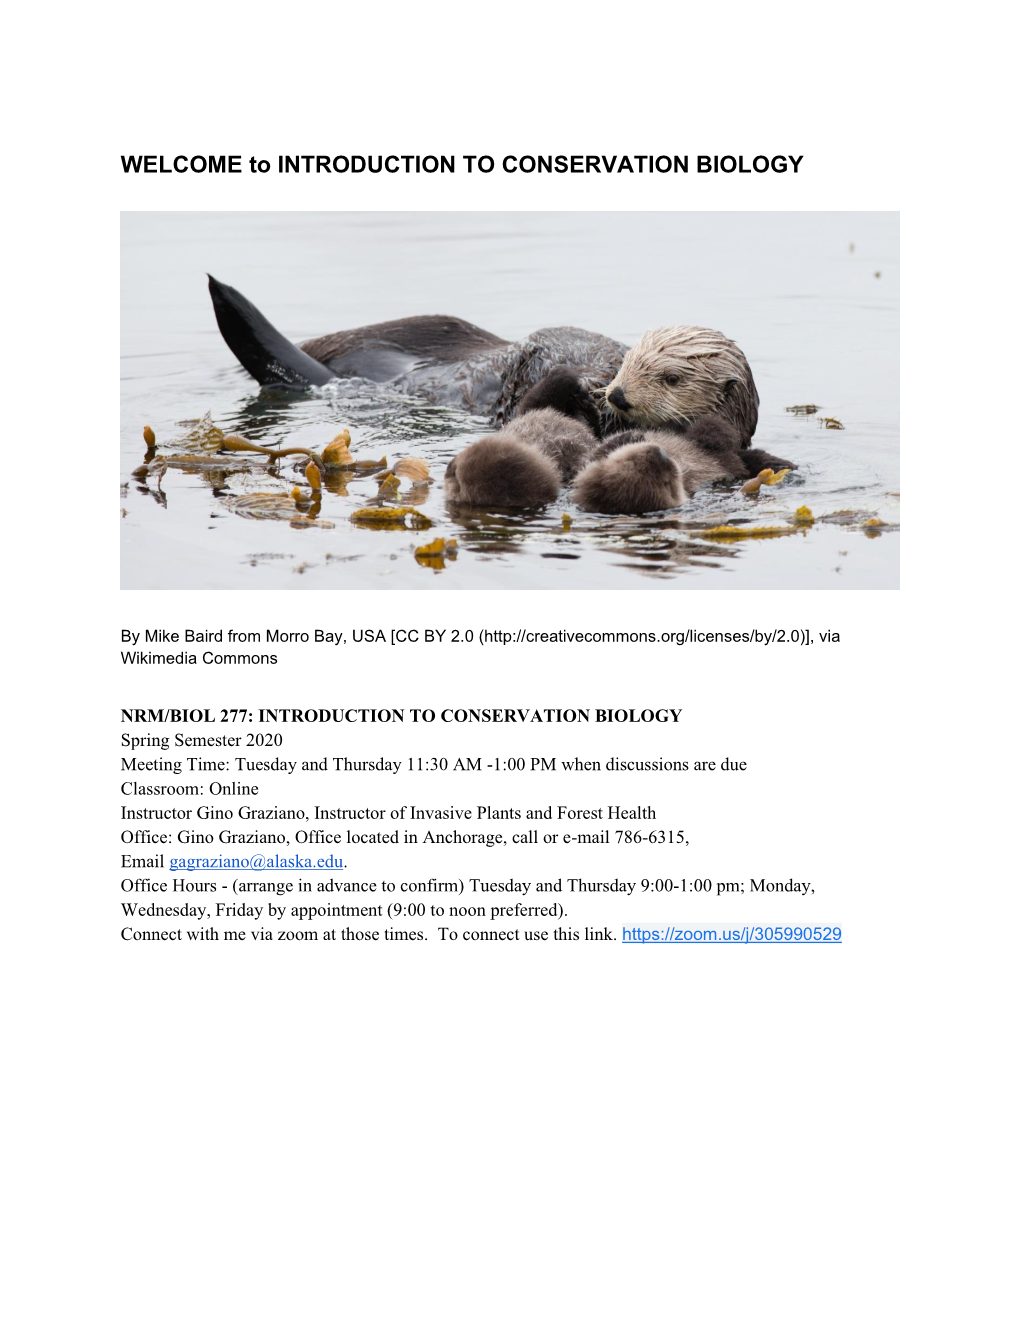 WELCOME to INTRODUCTION to CONSERVATION BIOLOGY